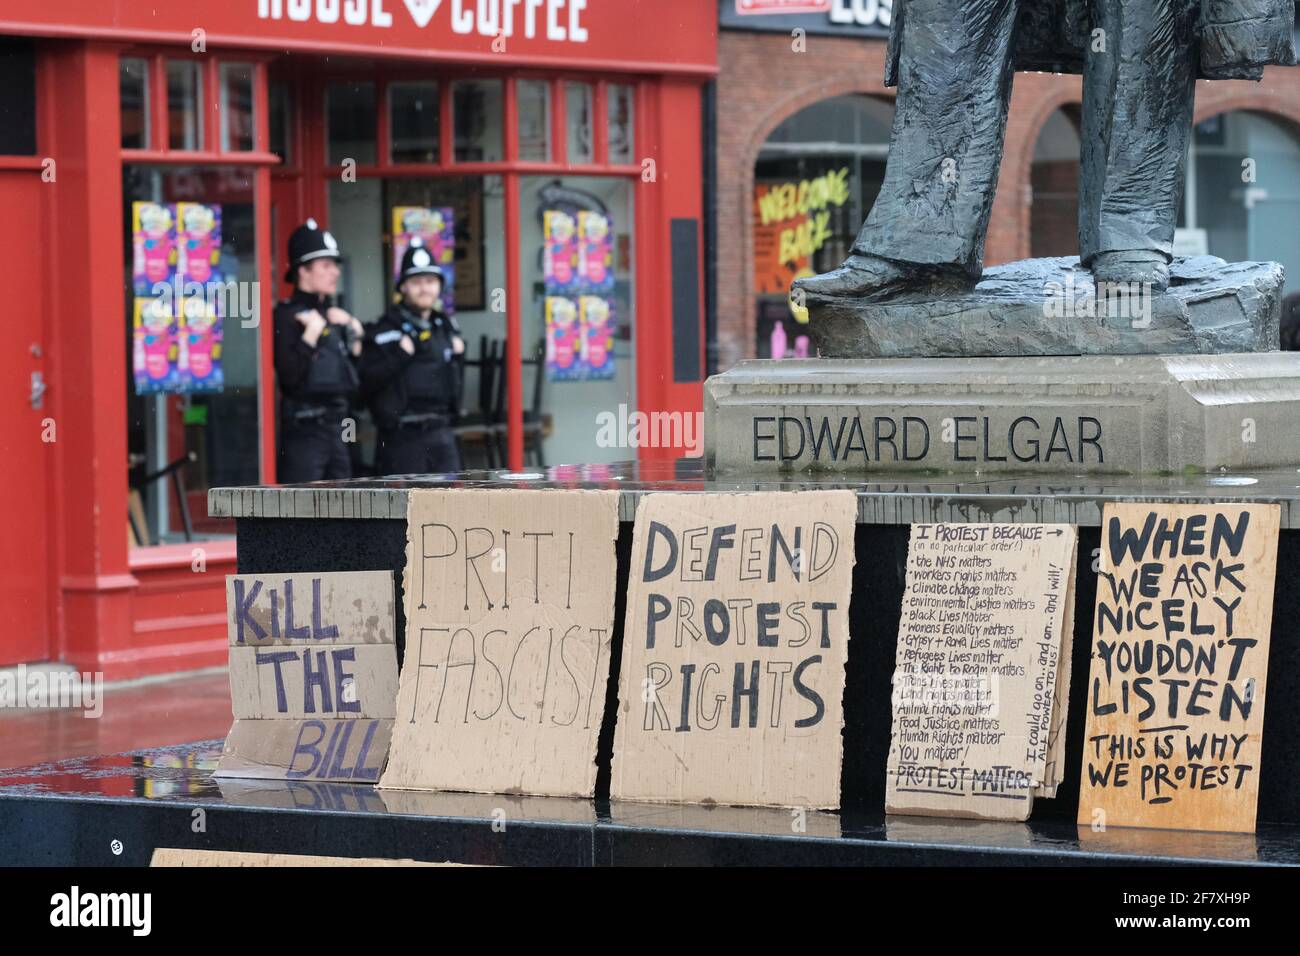 Worcester, Worcestershire, UK – Saturday 10th April 2021 – Placards left by Kill The Bill protesters in Worcester city centre against the new Police, Crime, Sentencing and Courts Bill ( PCSC ) which they feel will limit their rights to legal protest. Photo Steven May / Alamy Live News Stock Photo